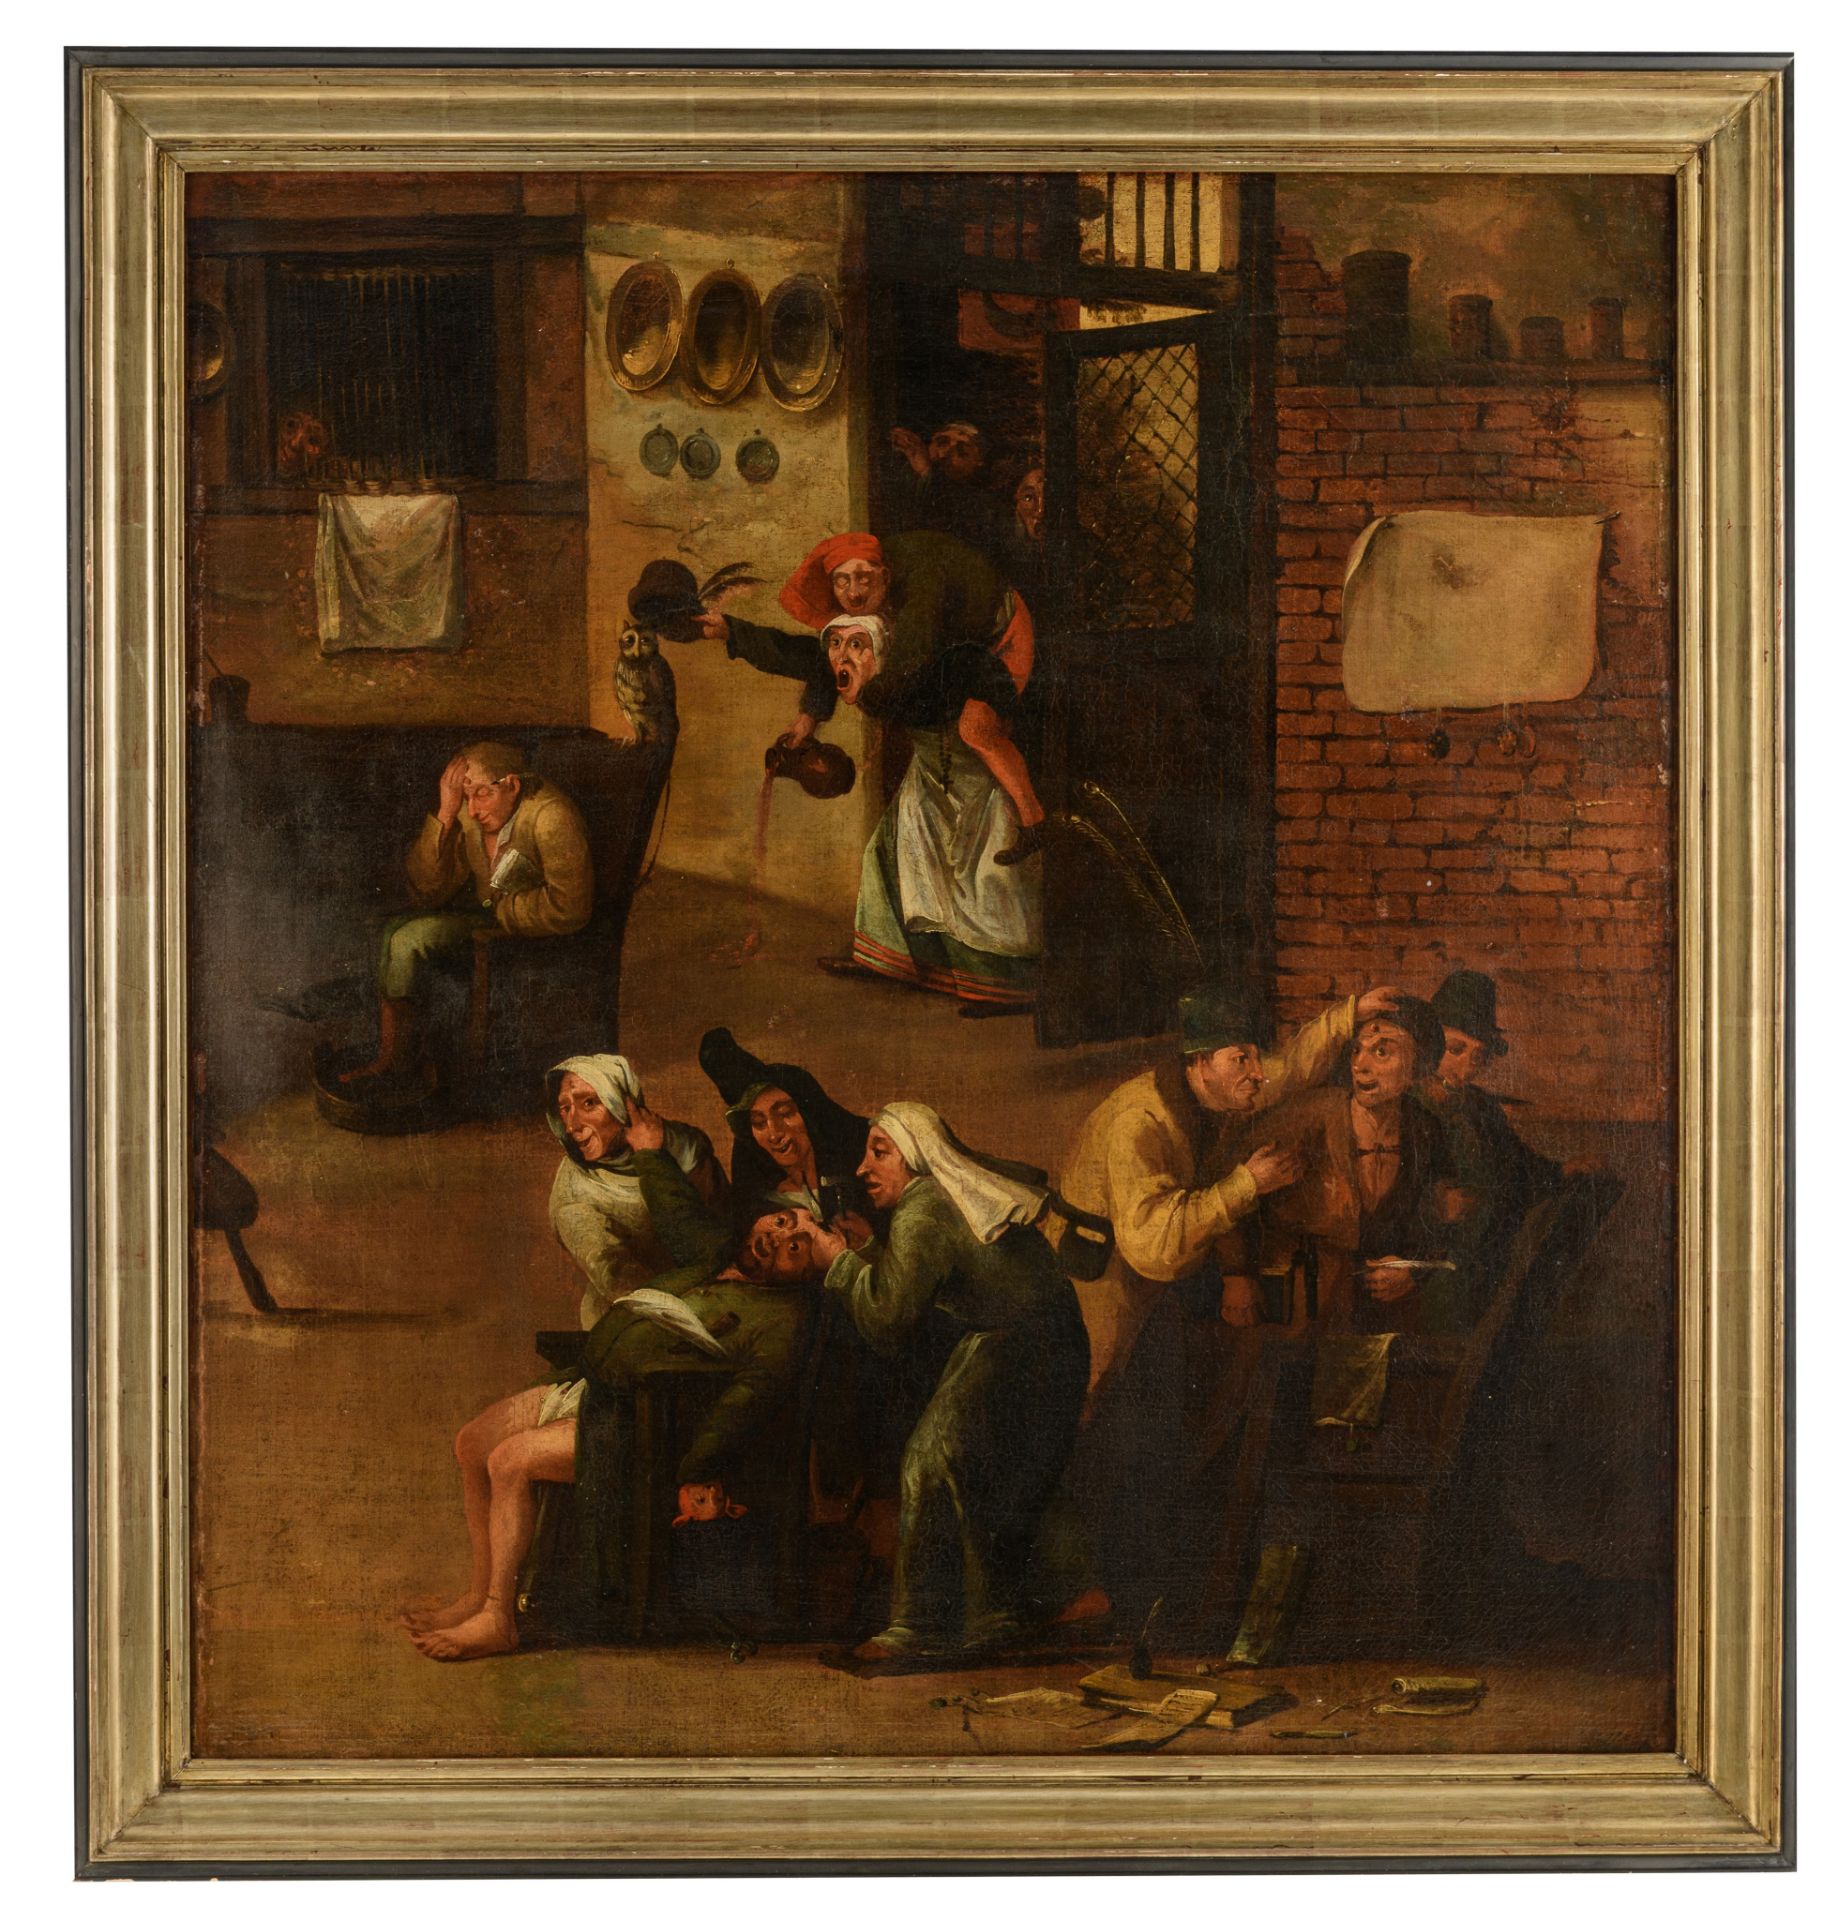 Workshop of Frans Verbeeck I or II, praise of folly, early 17thC, oil on canvas, 106 x 115 cm - Image 2 of 6